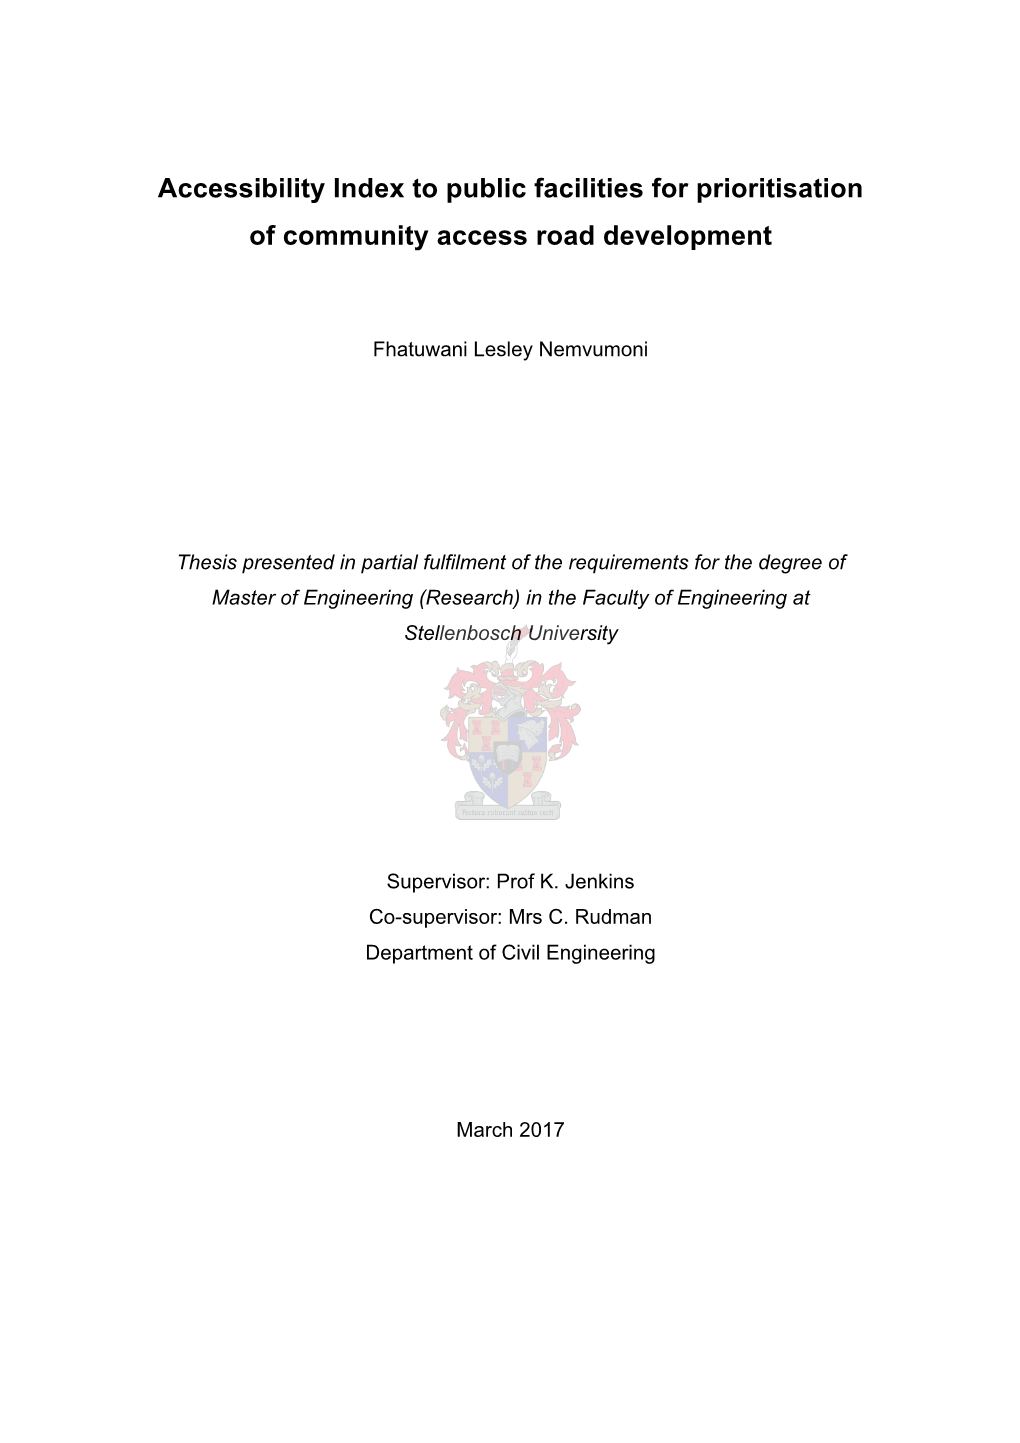 Accessibility Index to Public Facilities for Prioritisation of Community Access Road Development